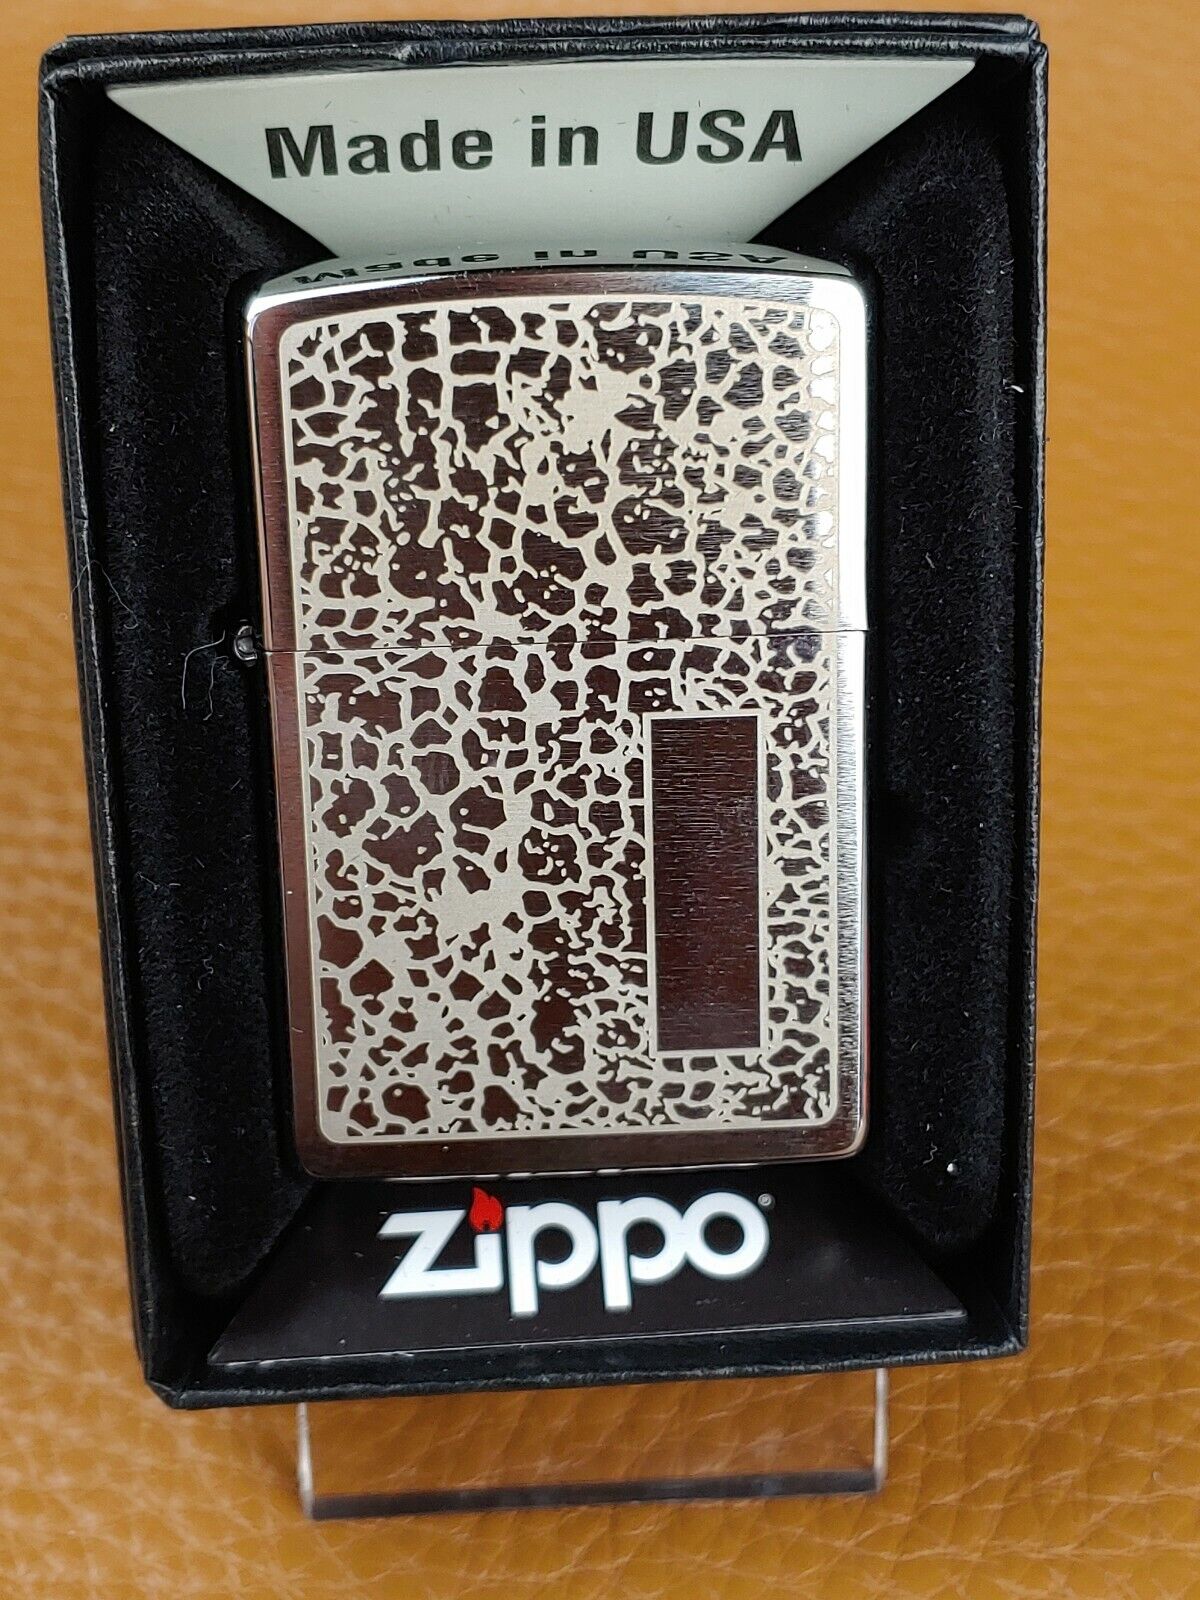 ZIPPO 49208 CRACKLE PATTERN on BRUSHED CHROME Lighter - NEW in Box JAN (A) 2020